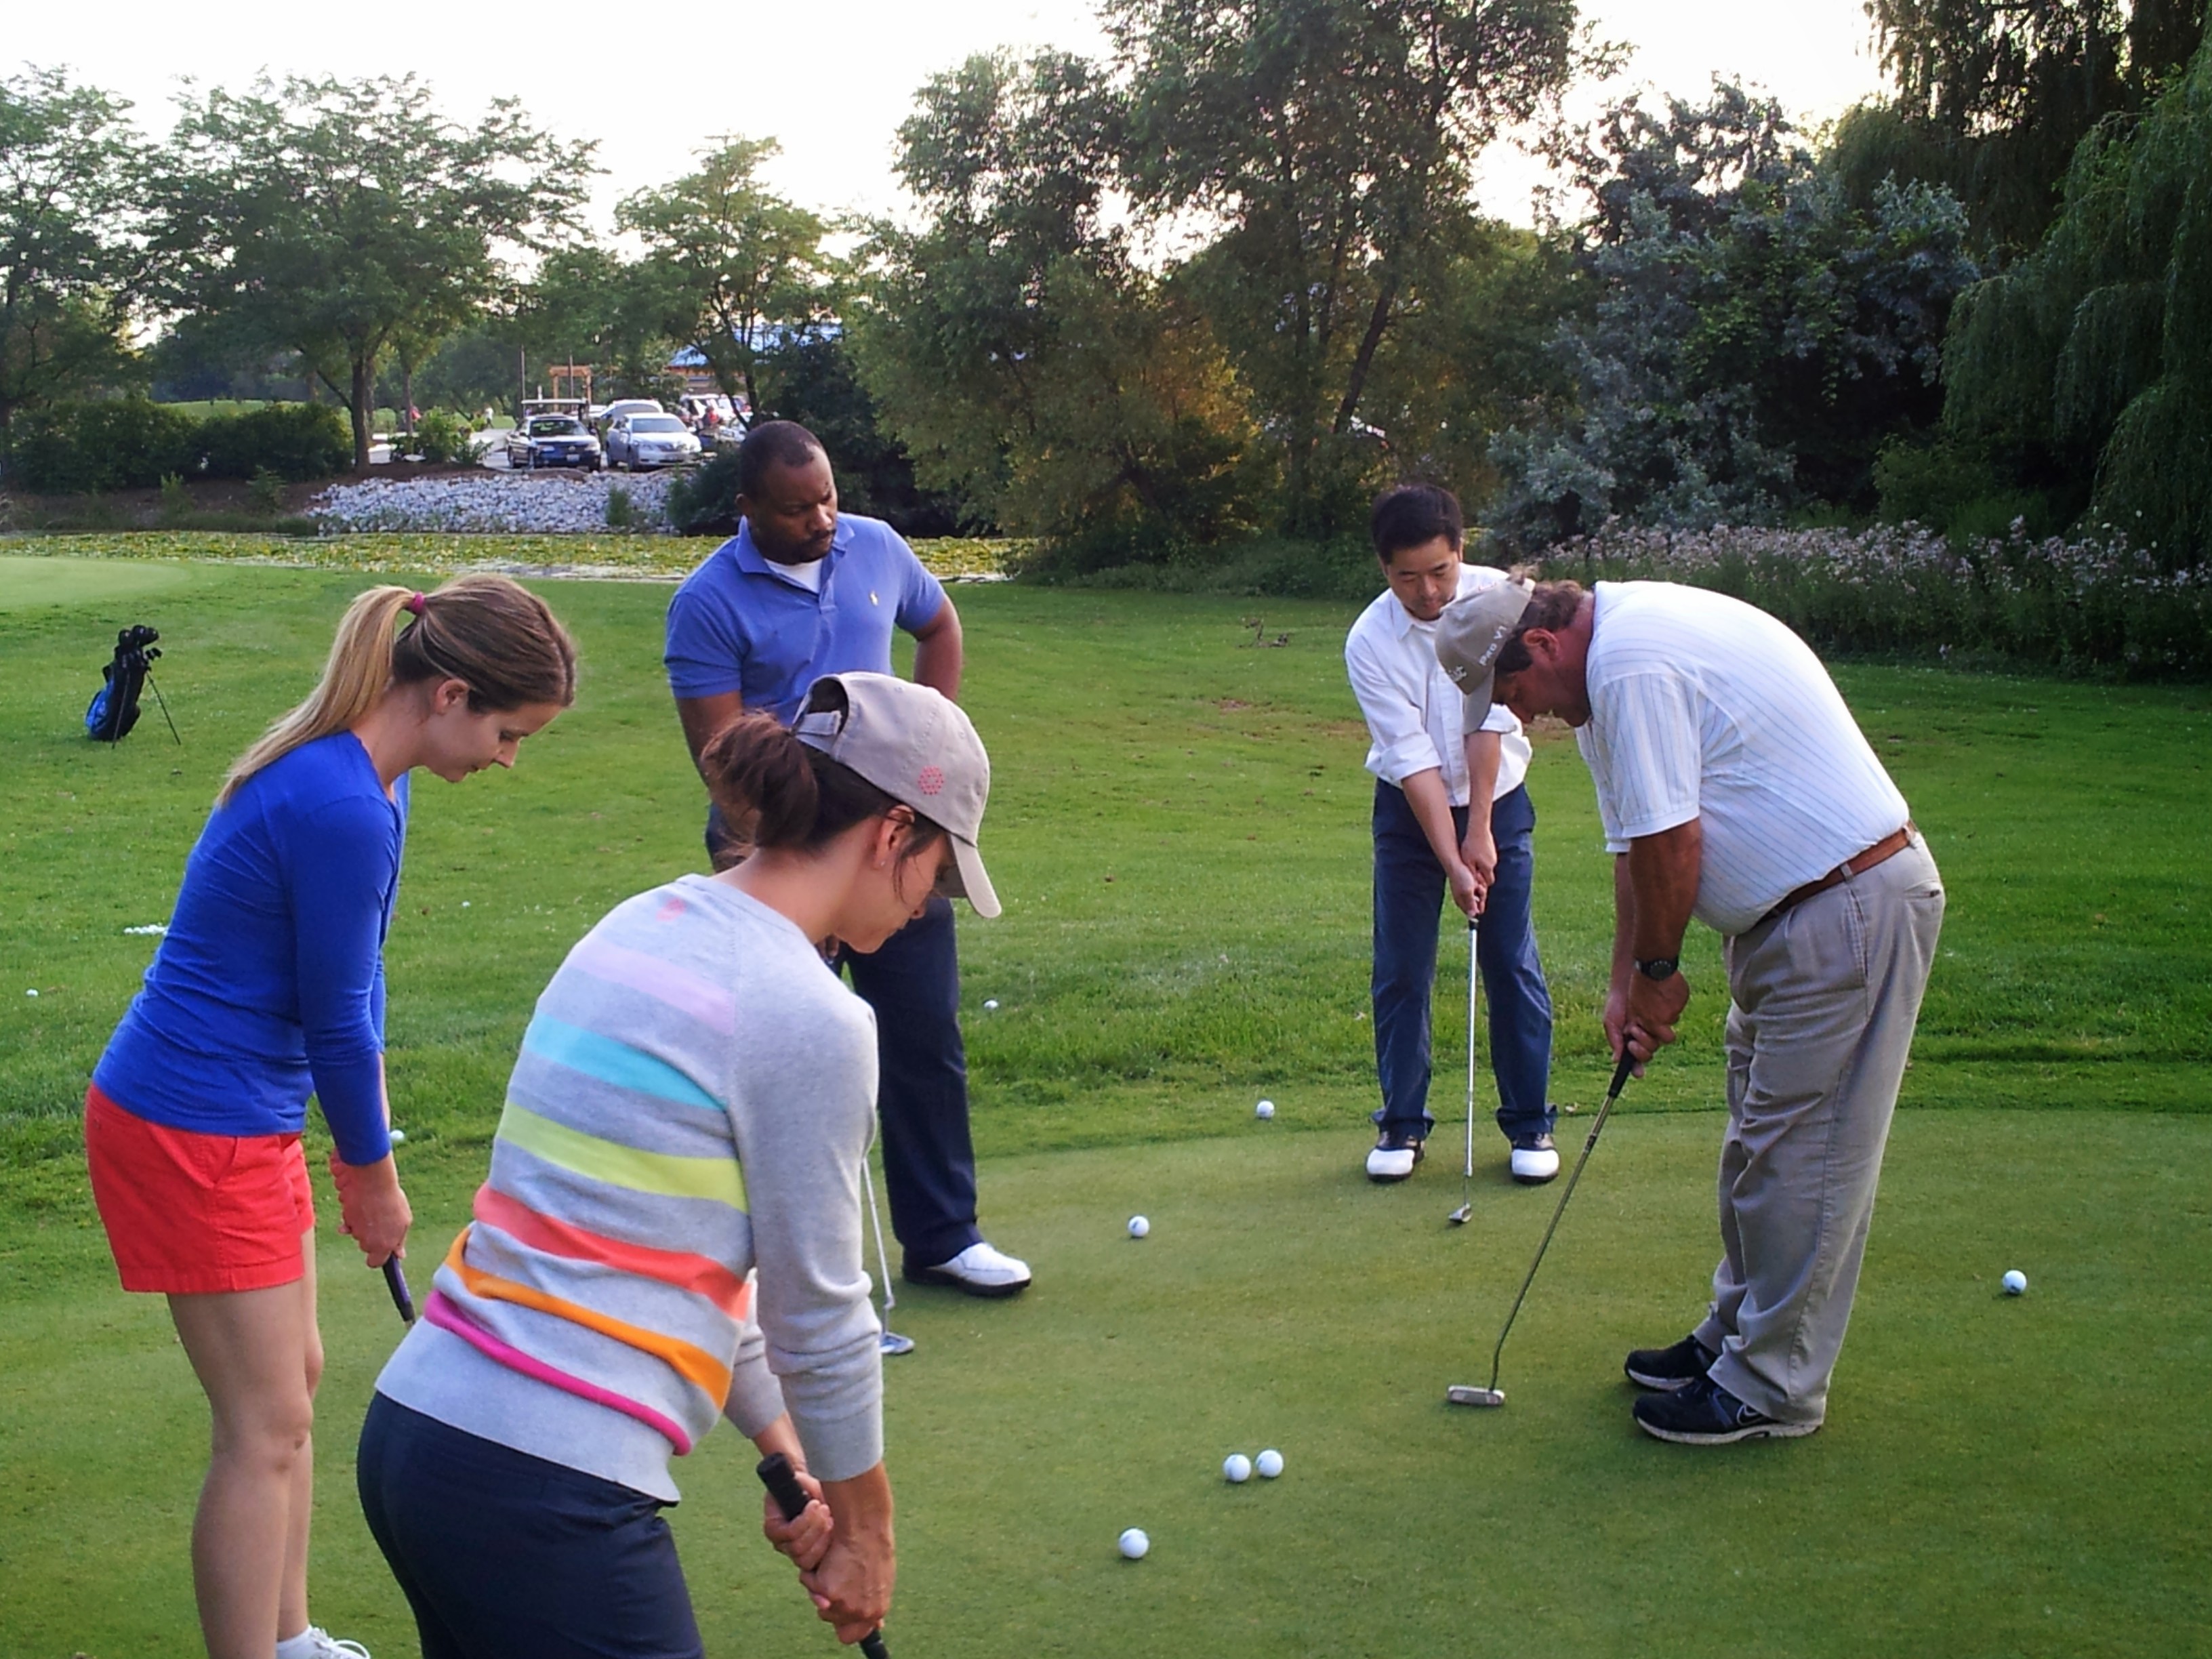 Group learning to play golf